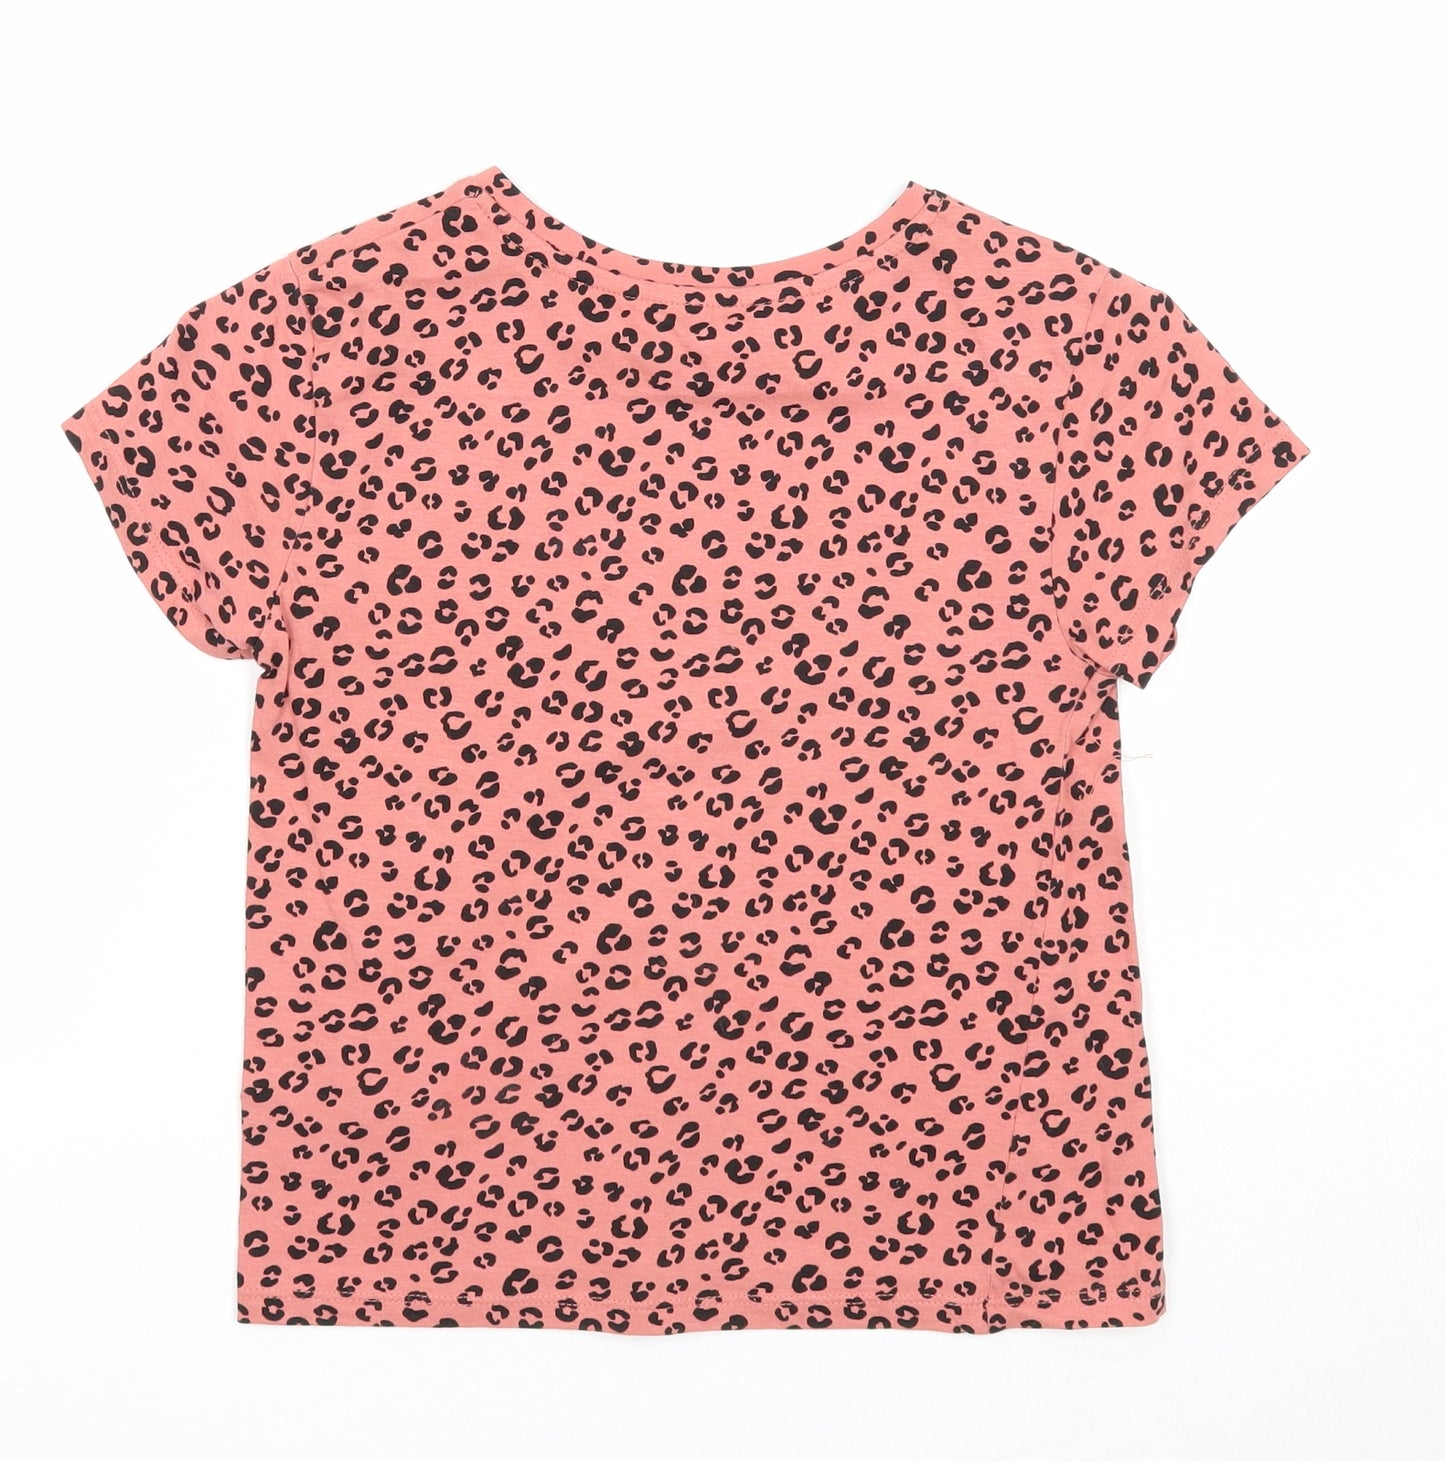 H&M Girls Pink Animal Print Cotton Basic T-Shirt Size 6-7 Years Round Neck Pullover - Size 6-8 Leopard Print